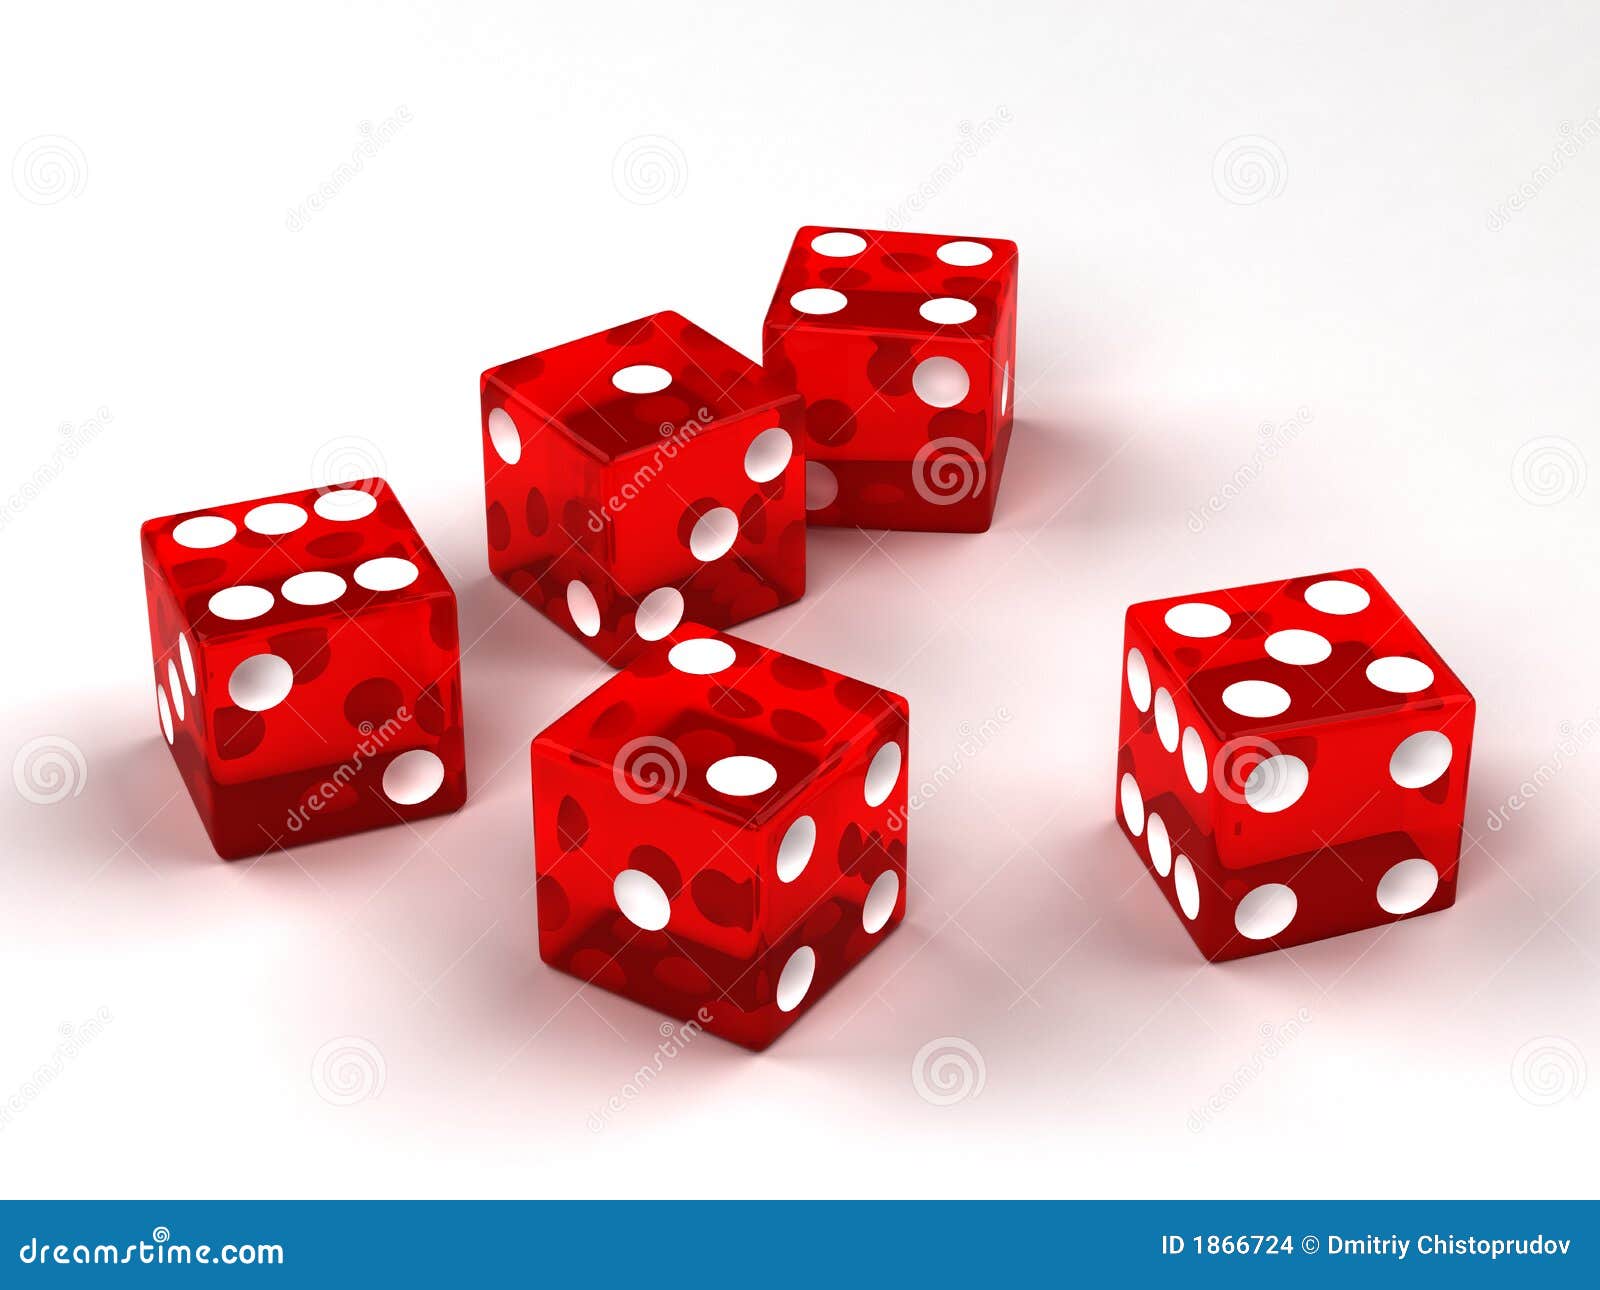 Six red glass dices rendered on the white background